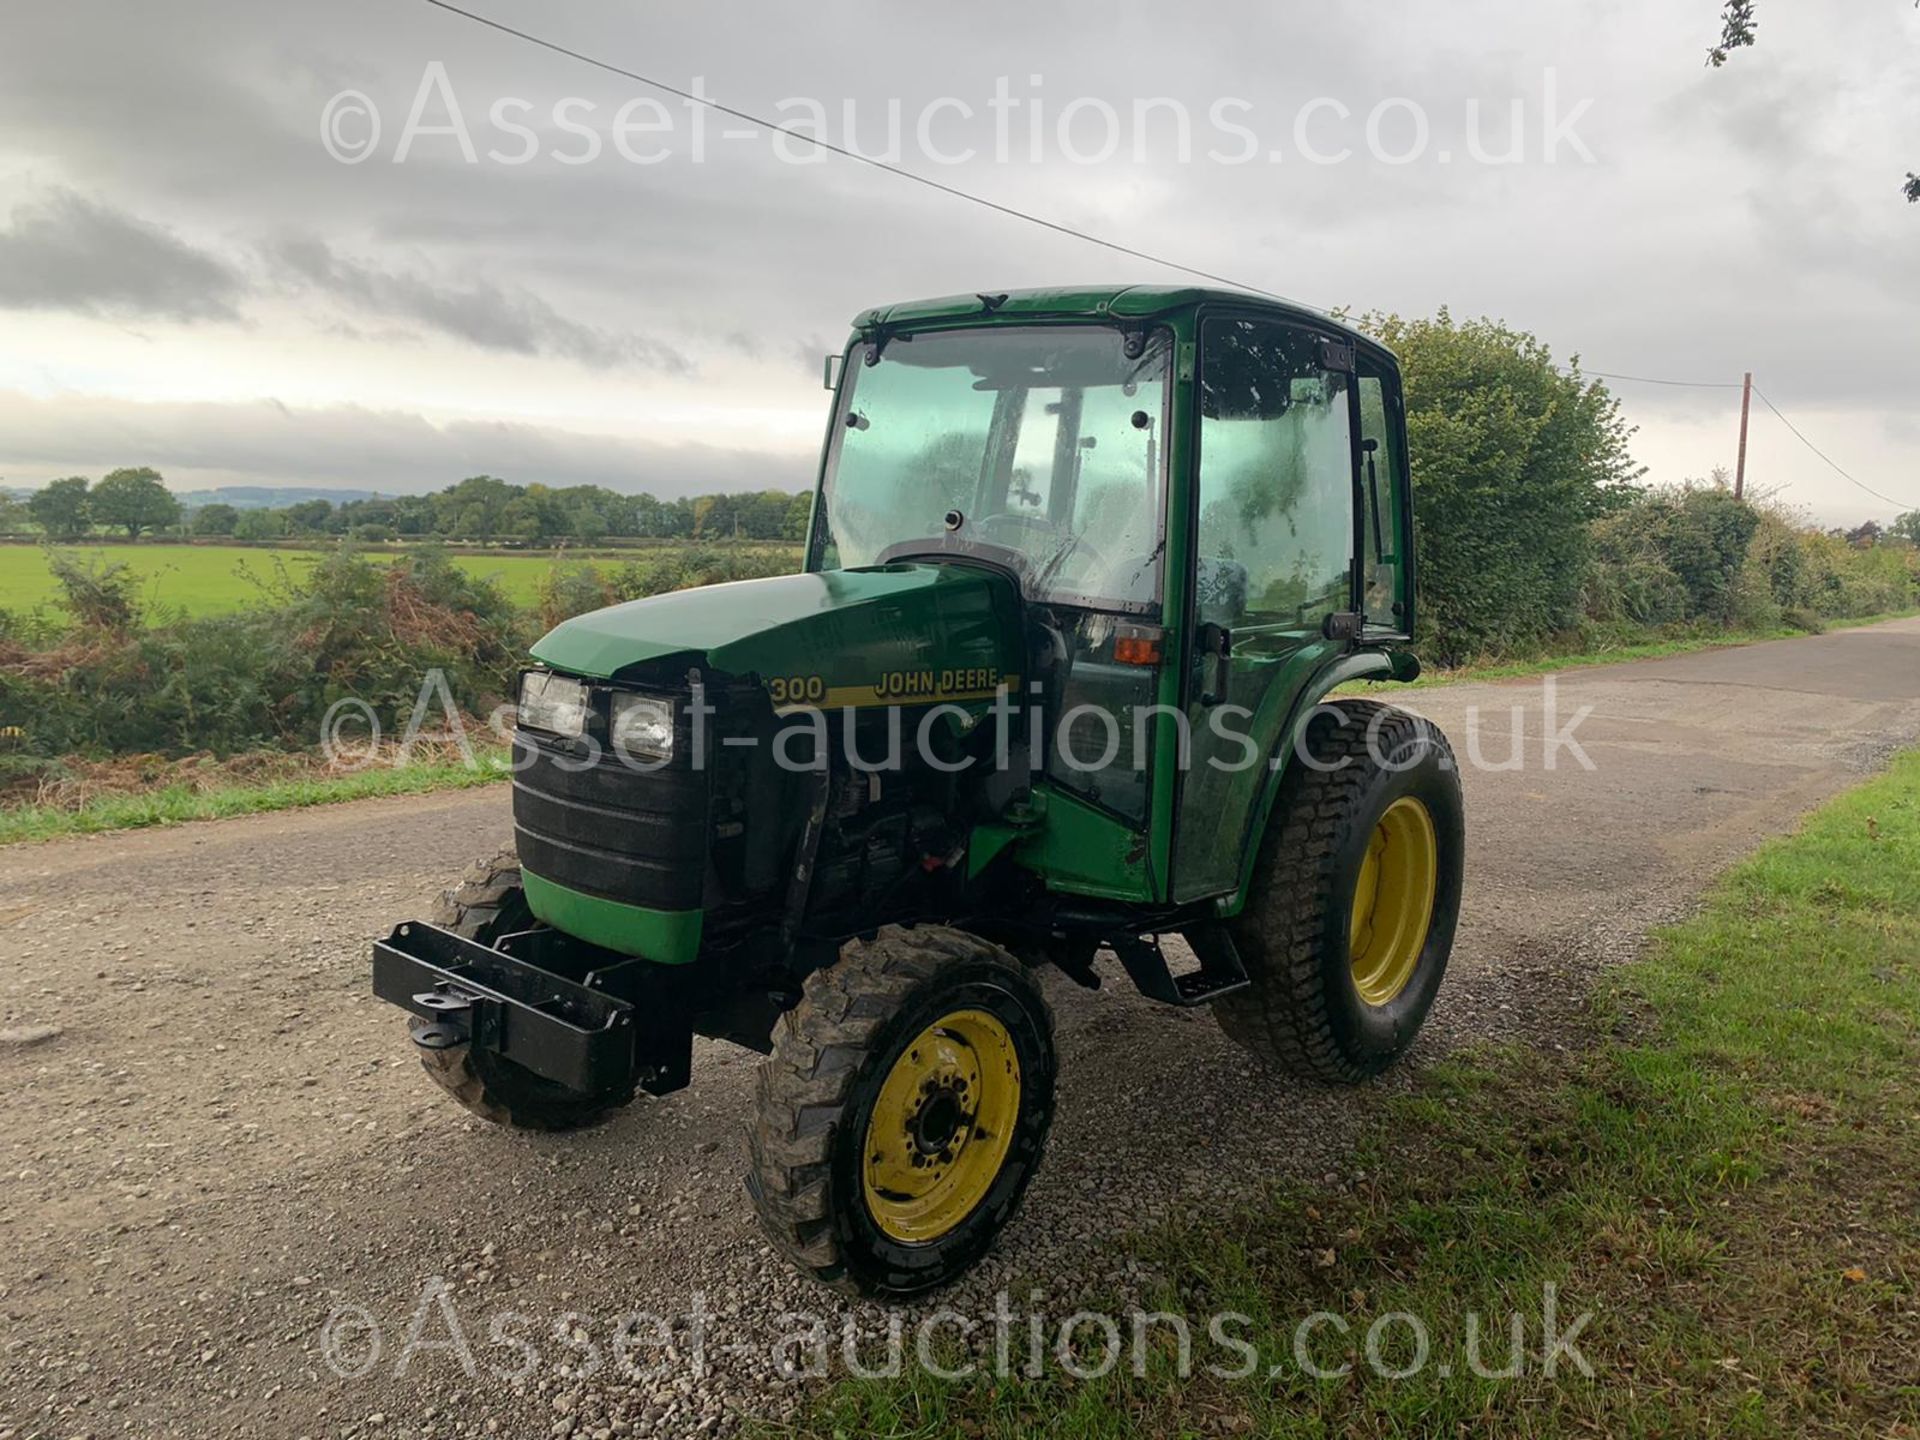 JOHN DEERE 4300 32hp 4WD COMPACT TRACTOR, RUNS DRIVES AND WORKS, CABBED, REAR TOW, ROAD KIT